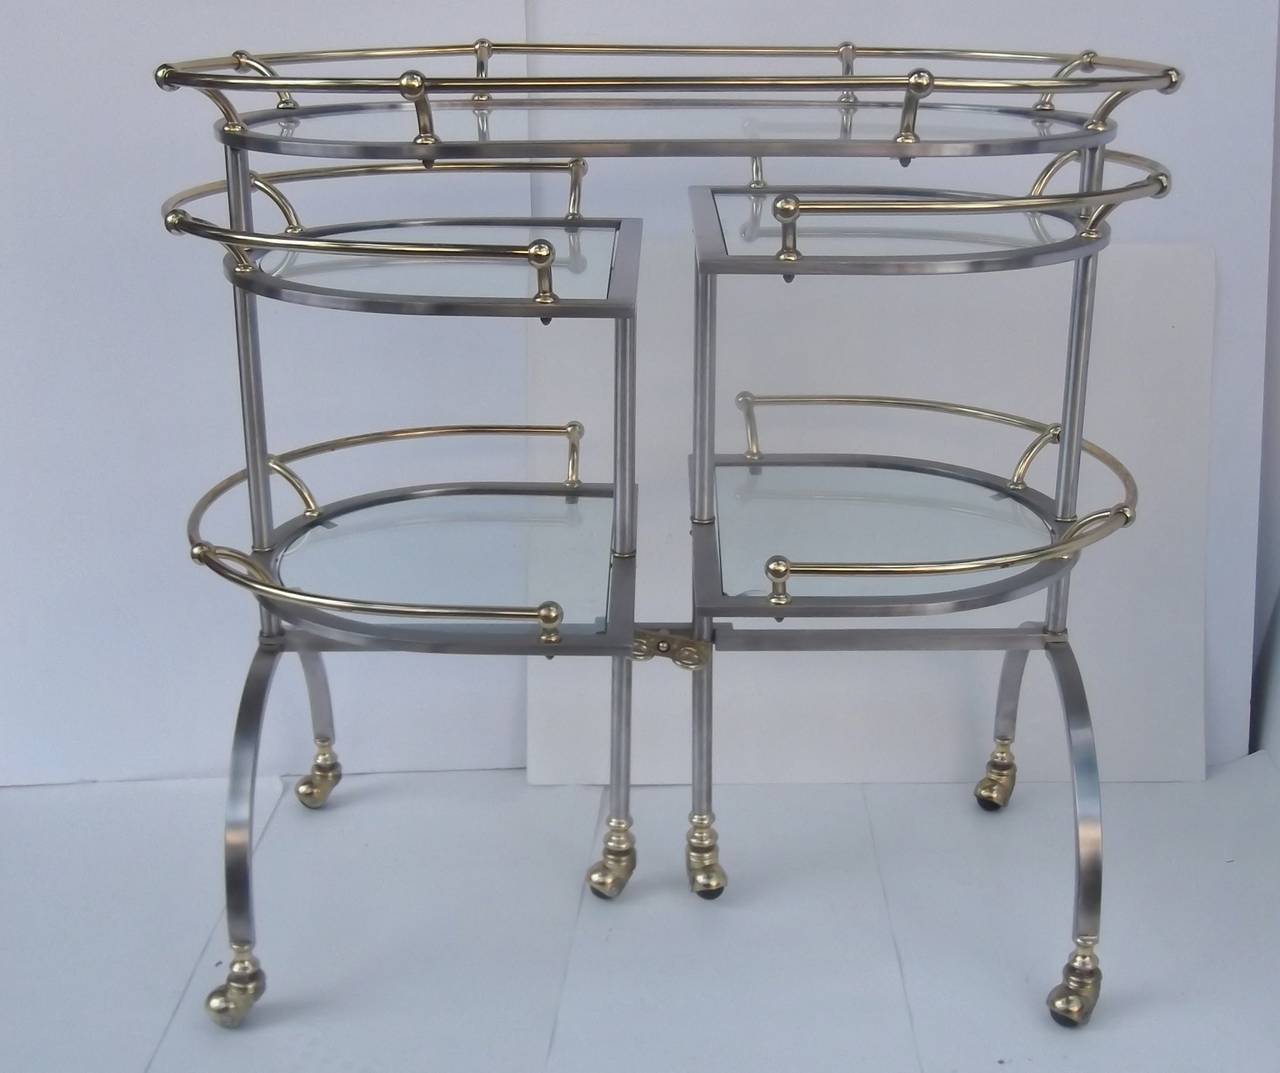 Very unique bar cart with roll out sides.
Triple tiered with brass gallery edge, the sides swing out on castors to offer a doubled serving area.  The tiers on each side are slightly lower on one than the other.  A total of six castors support this